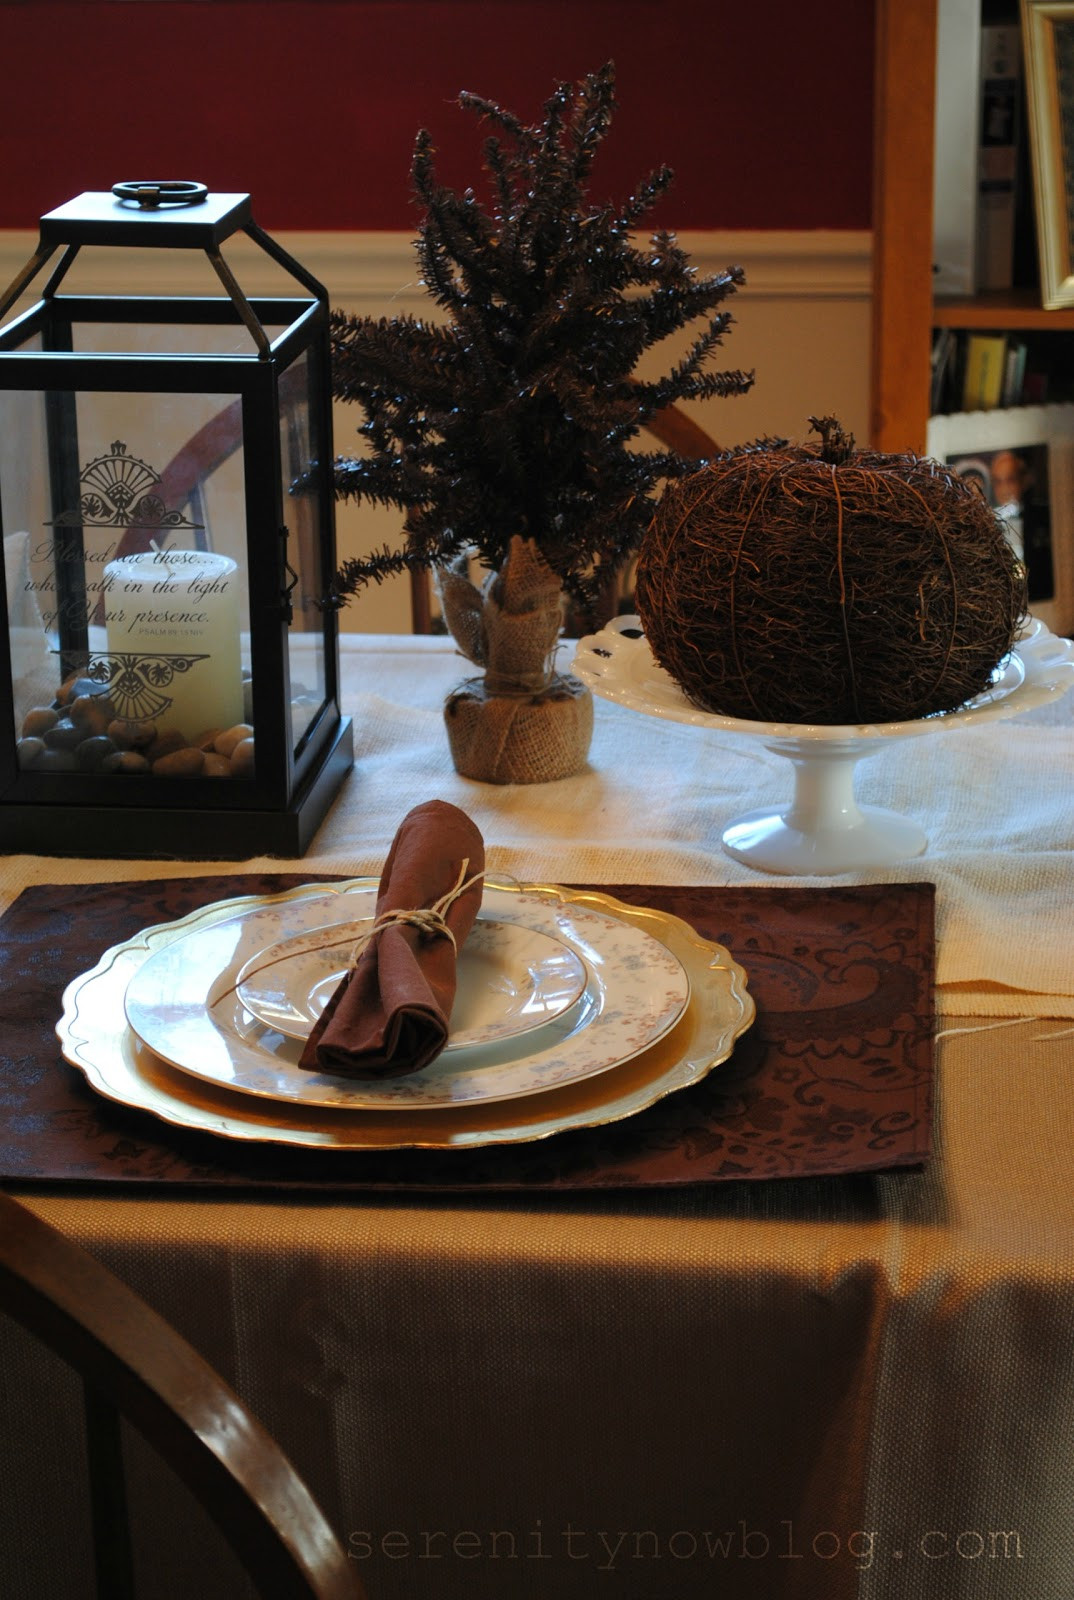 Inexpensive Thanksgiving Table Decorations
 Serenity Now My Inexpensive Thanksgiving Table Decor